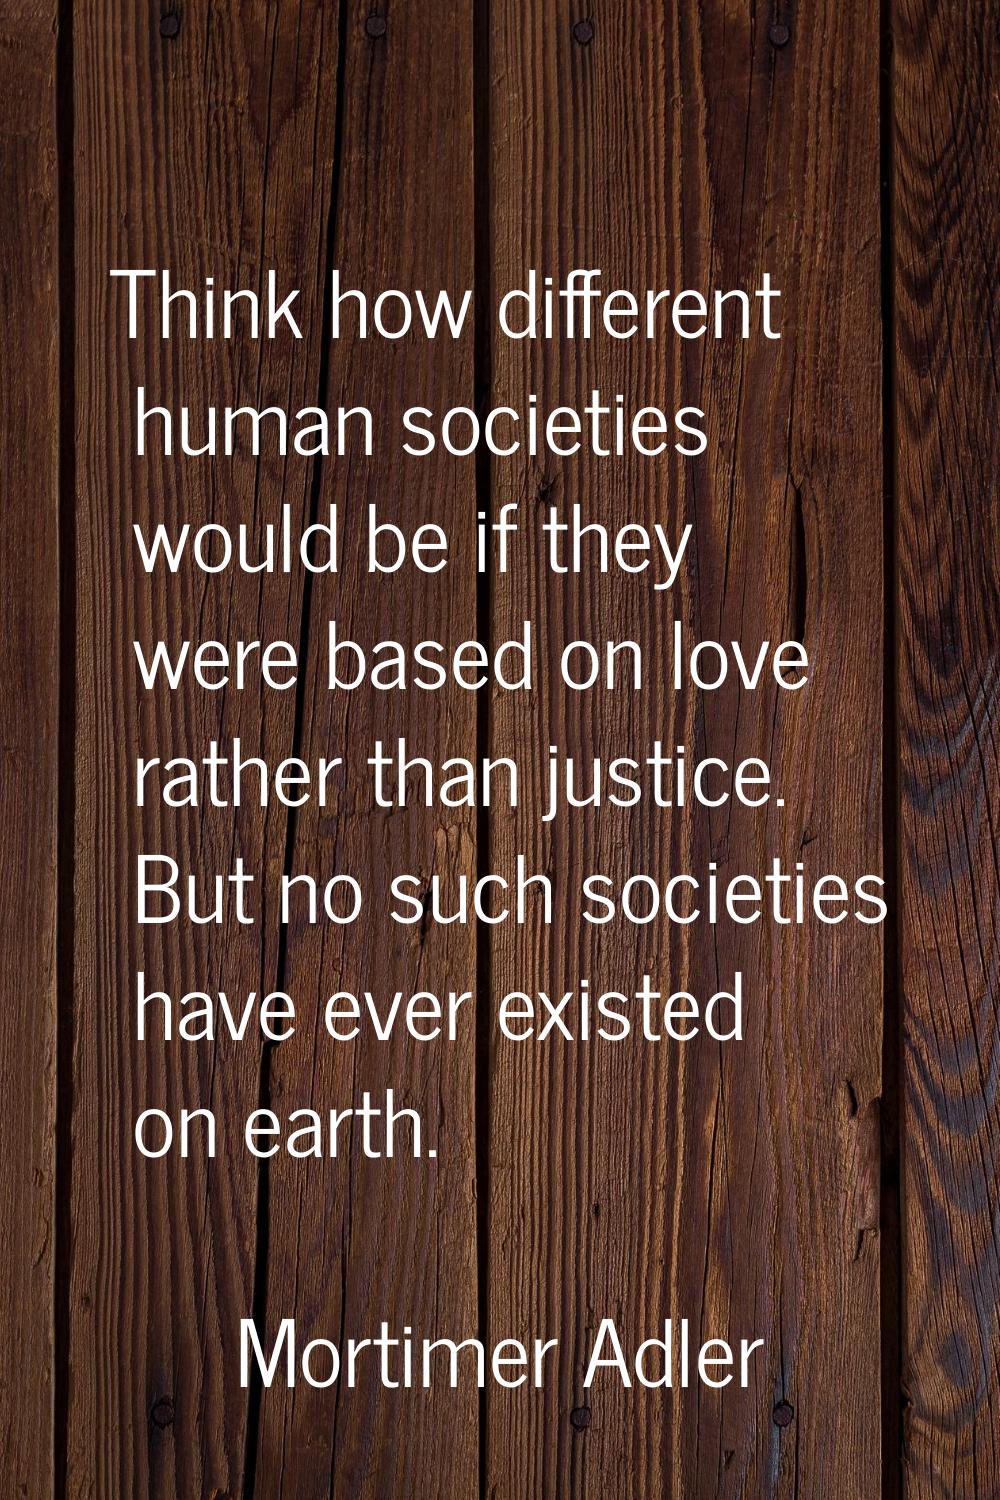 Think how different human societies would be if they were based on love rather than justice. But no